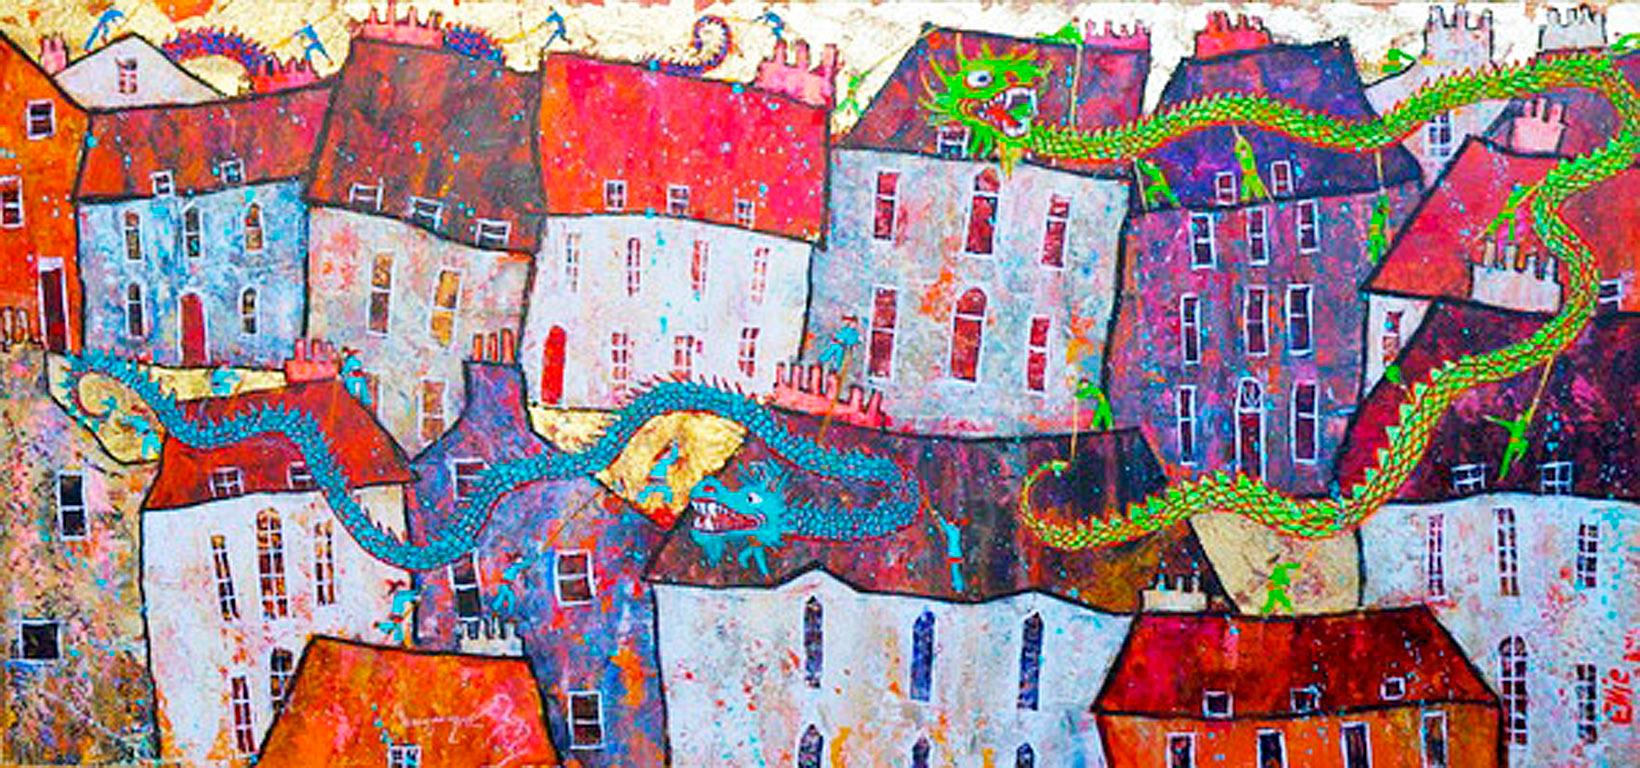 Chinese Dragon Dance - contemporary vibrant townscape dragons mixed media  - Painting by Ellie Hesse